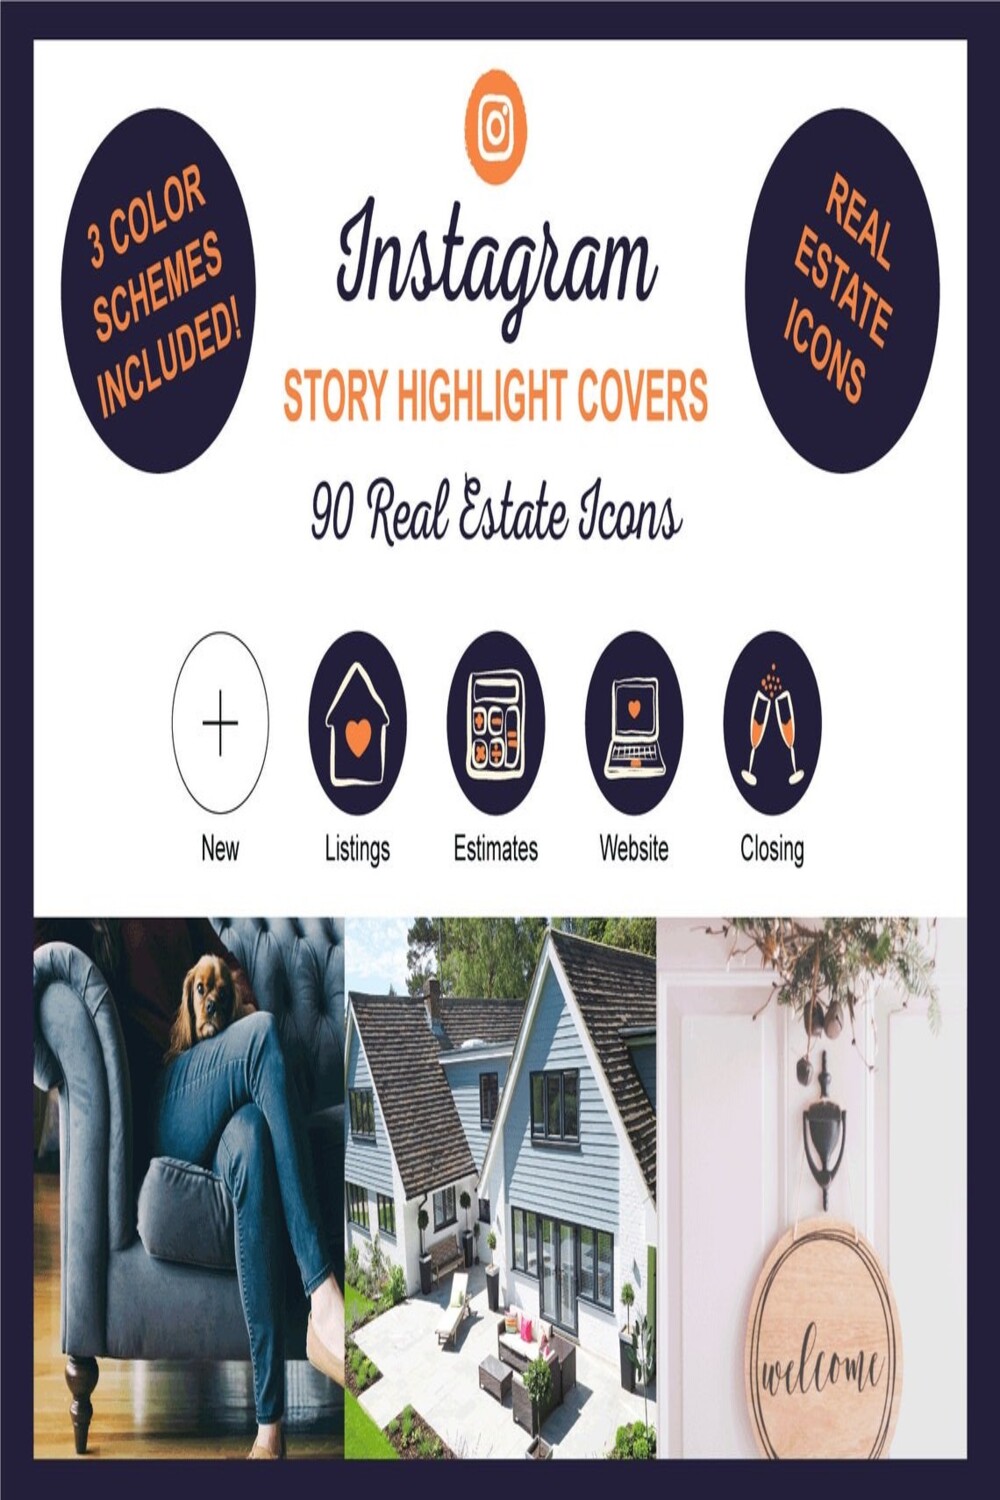 Instagram Story Highlight Covers (90 Real Estate Icons) pinterest image.